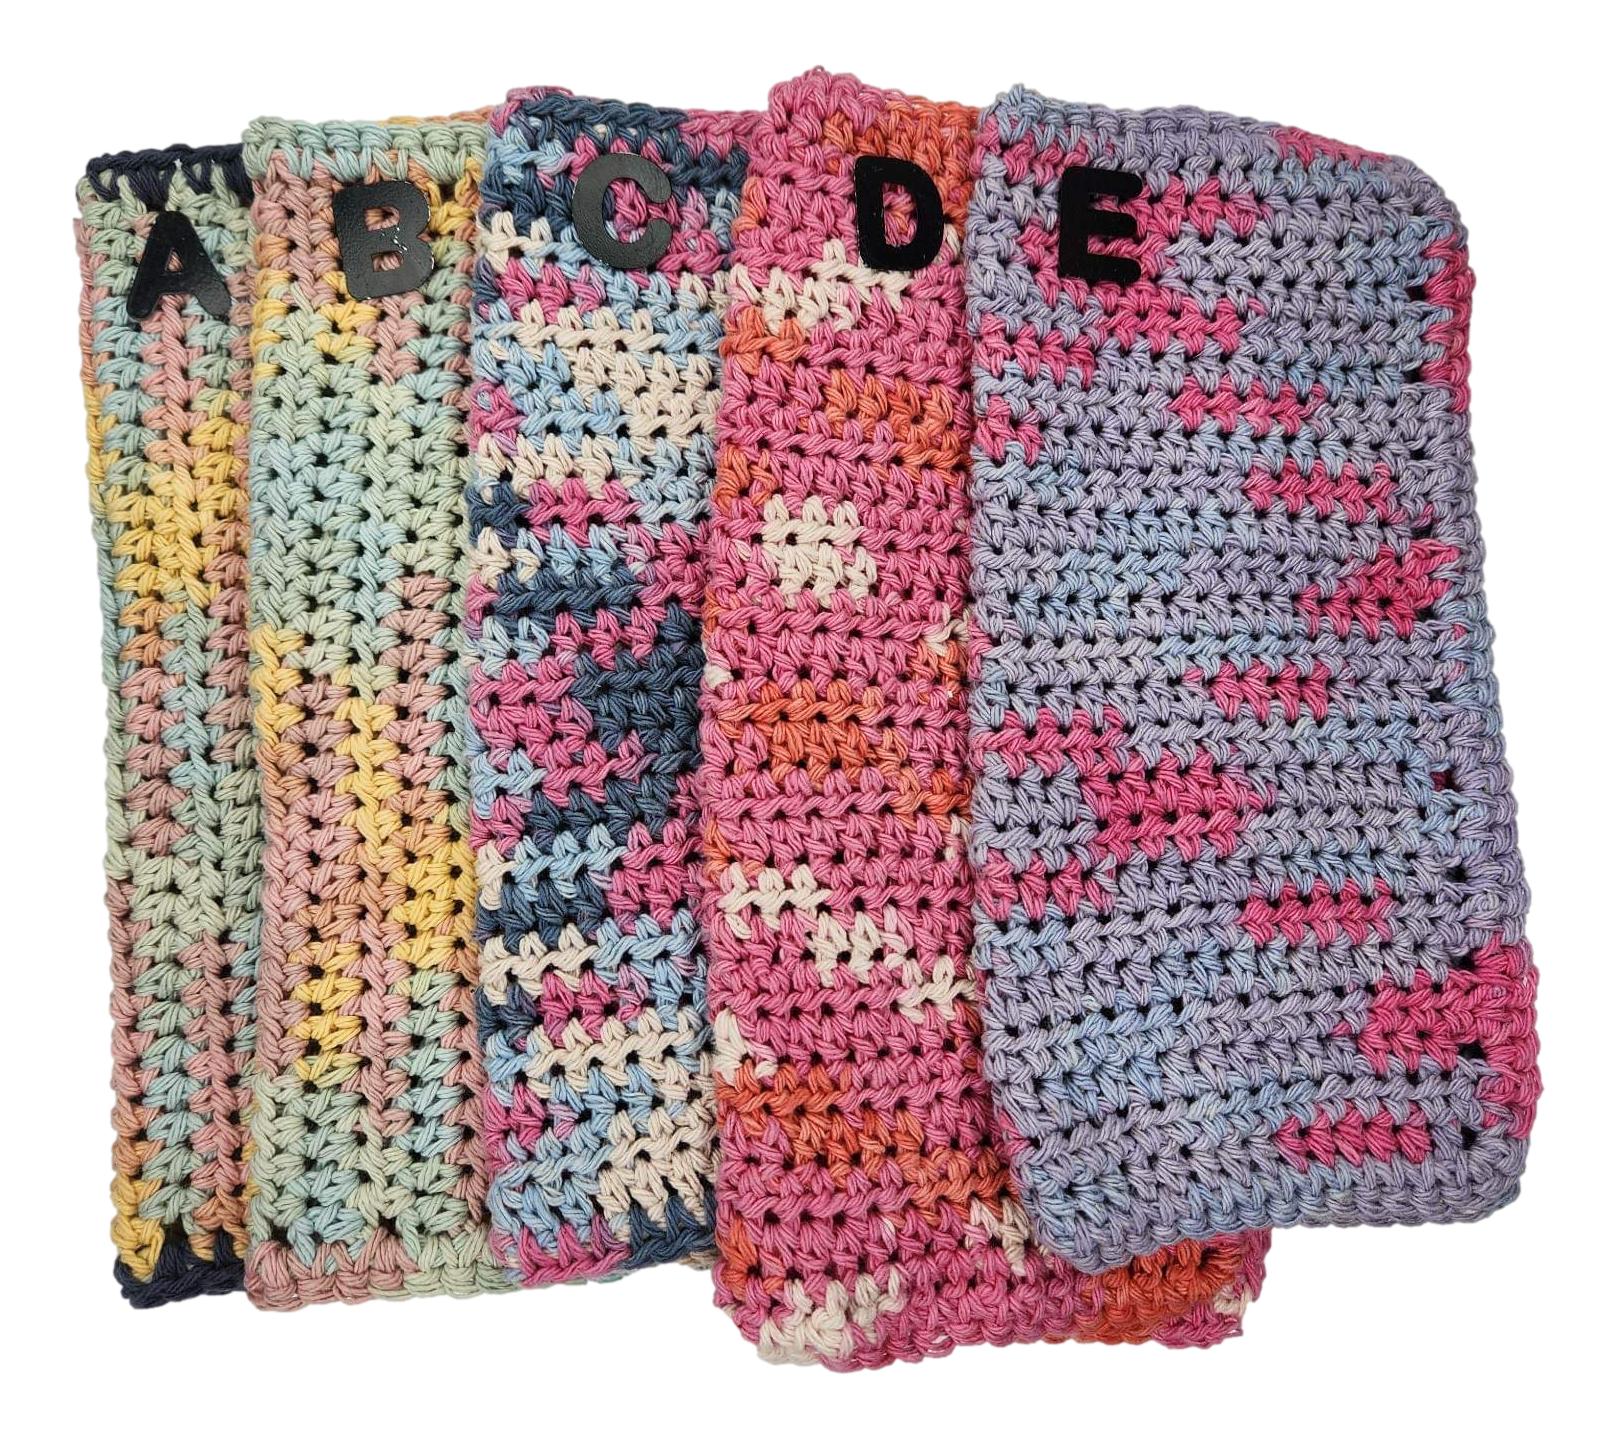 Dish Cloth Knit Single Pastel Tones Handwoven by New Mexico Artist 10 L x 9 W Inches - Ysleta Mission Gift Shop- VOTED 2022 El Paso's Best Gift Shop